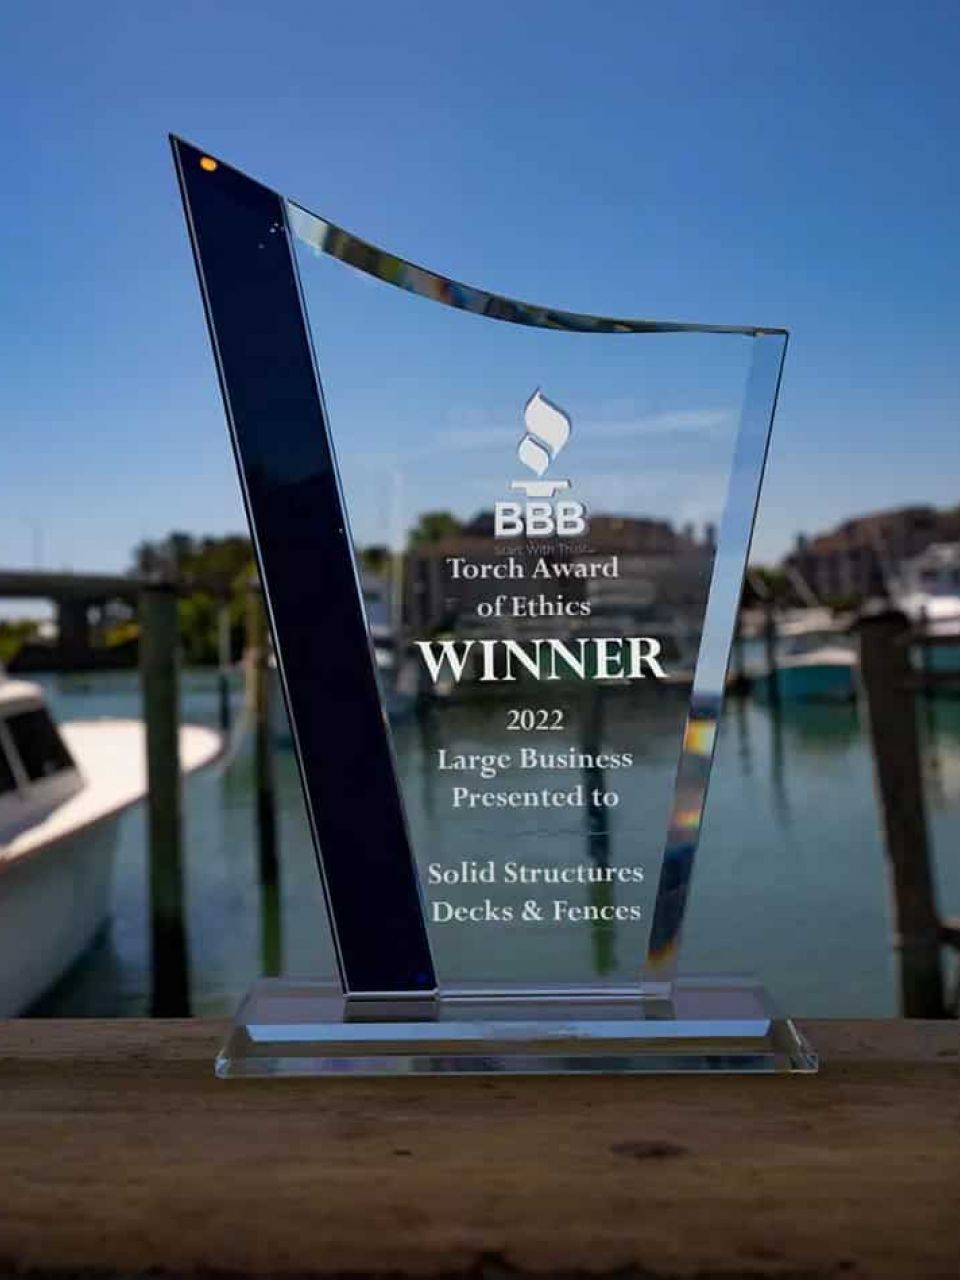 BBB Torch Award Image by boats